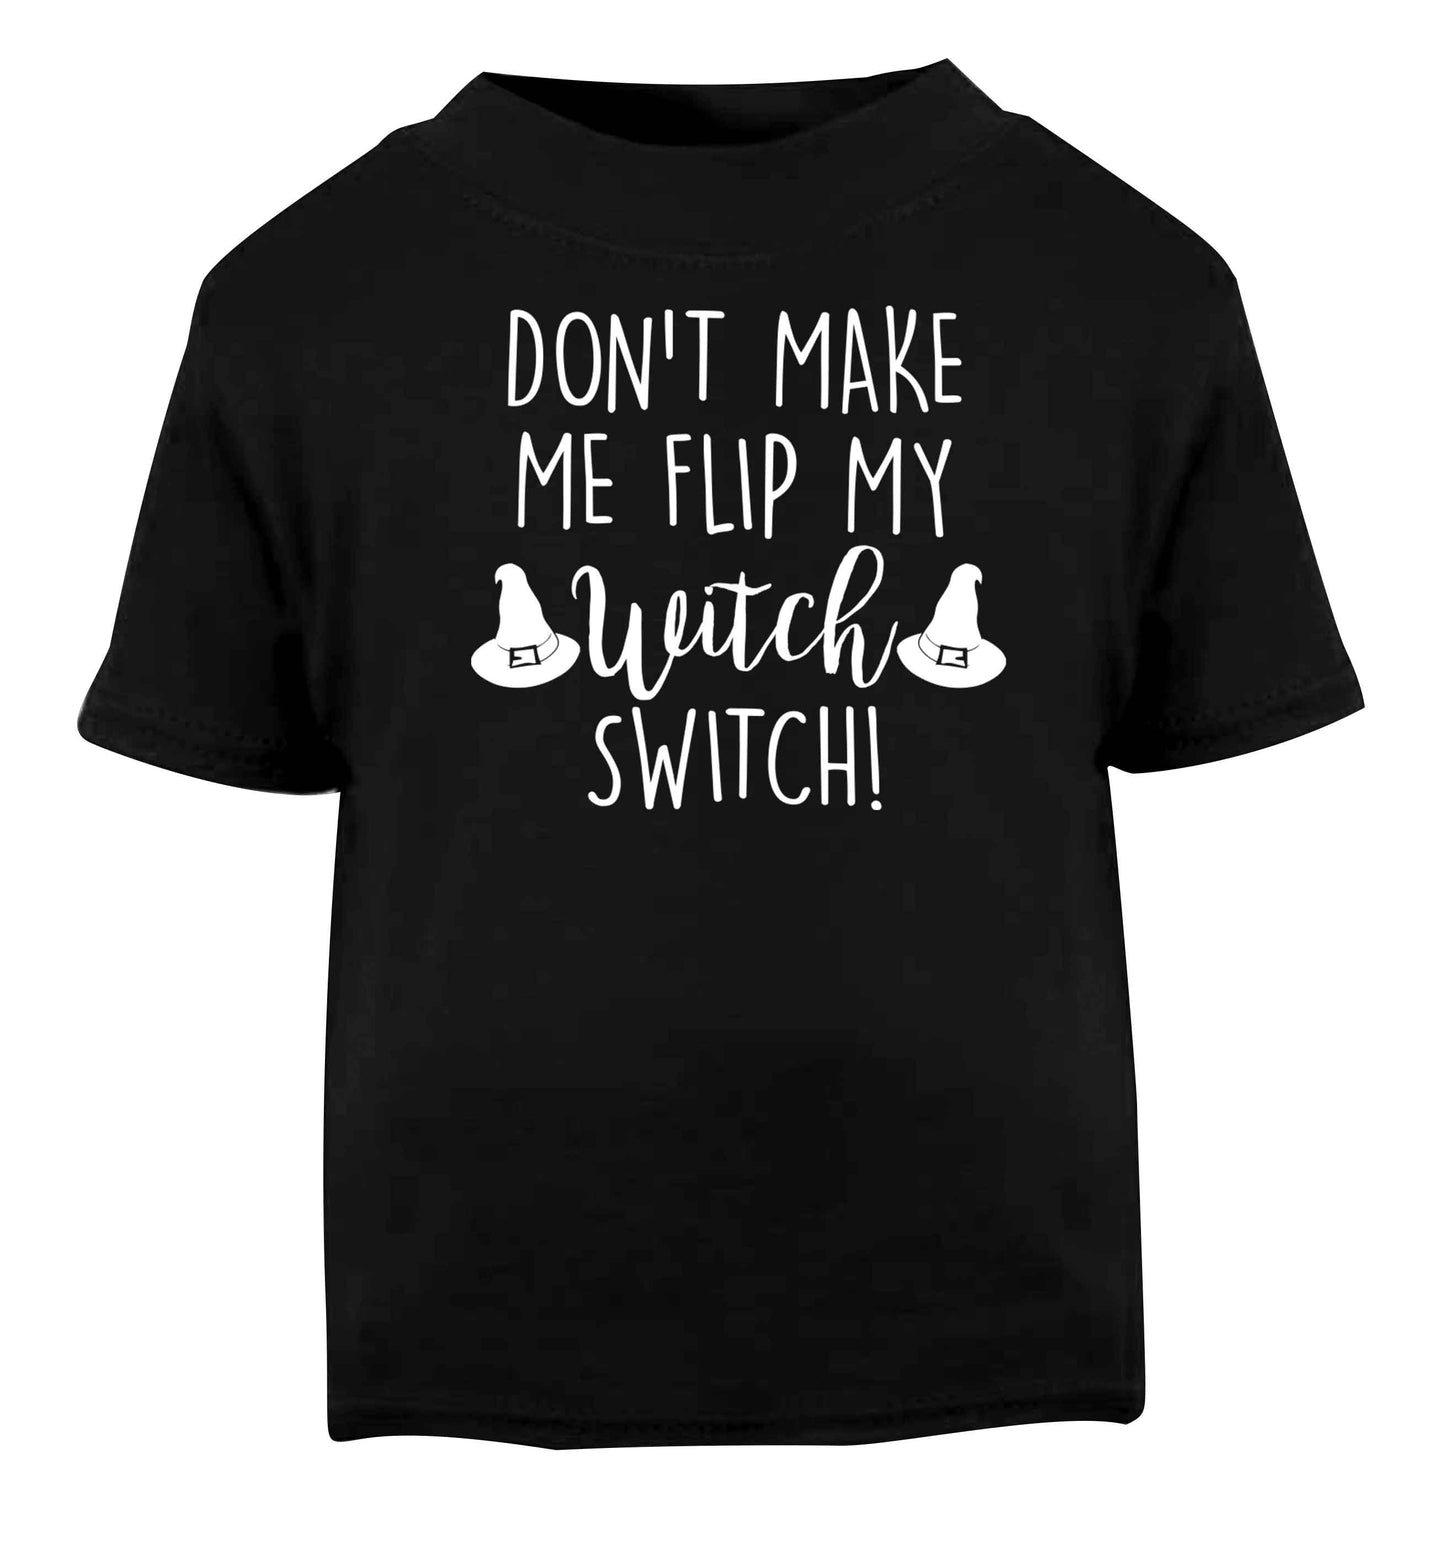 Don't make me flip my witch switch Black baby toddler Tshirt 2 years